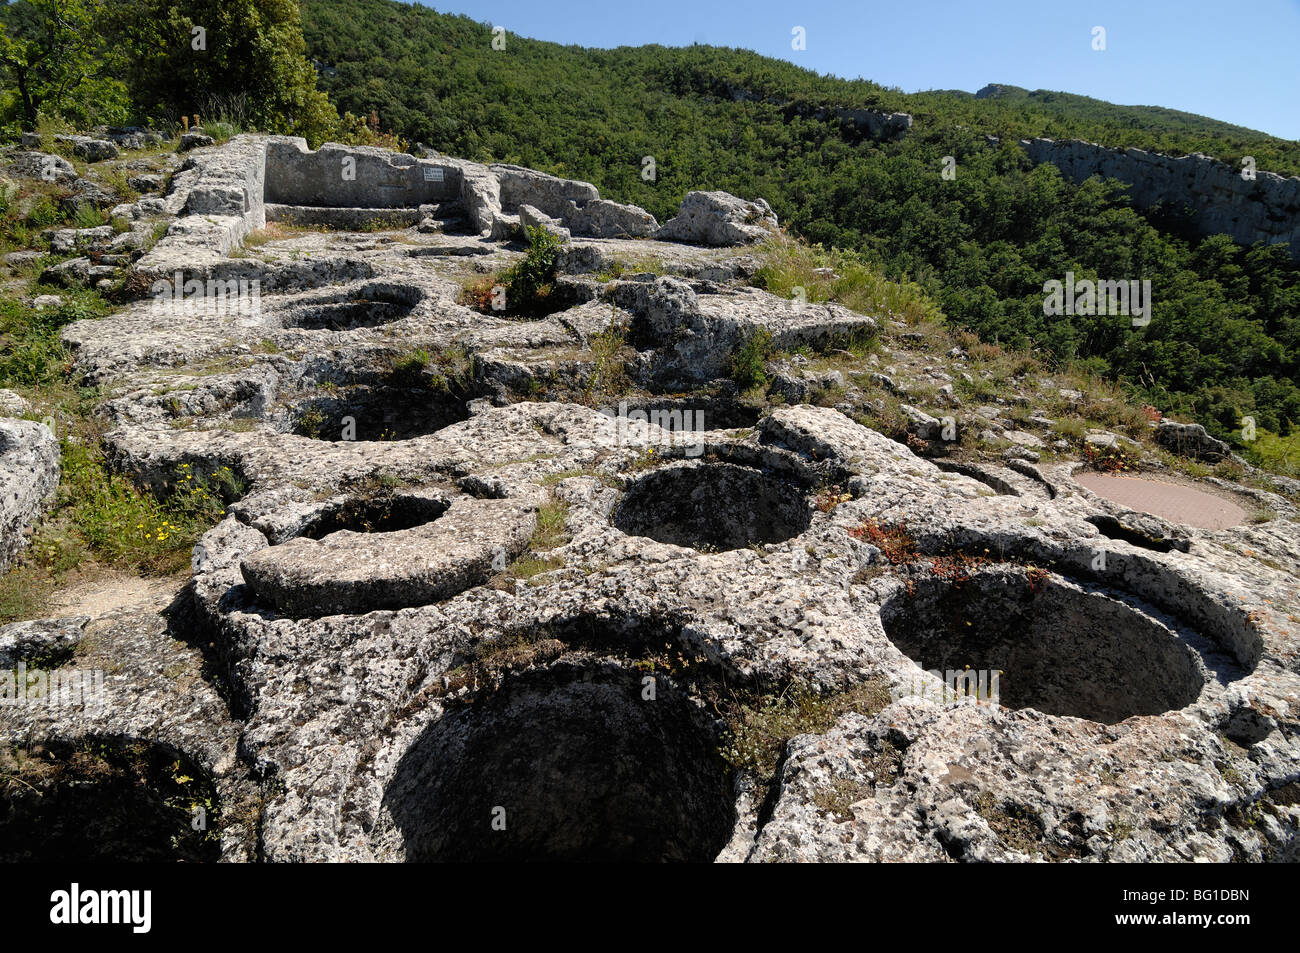 Buoux Fort and Rock-Cut Protohistoric Storage Silos or Jars, Luberon, Vaucluse, Provence, France Stock Photo